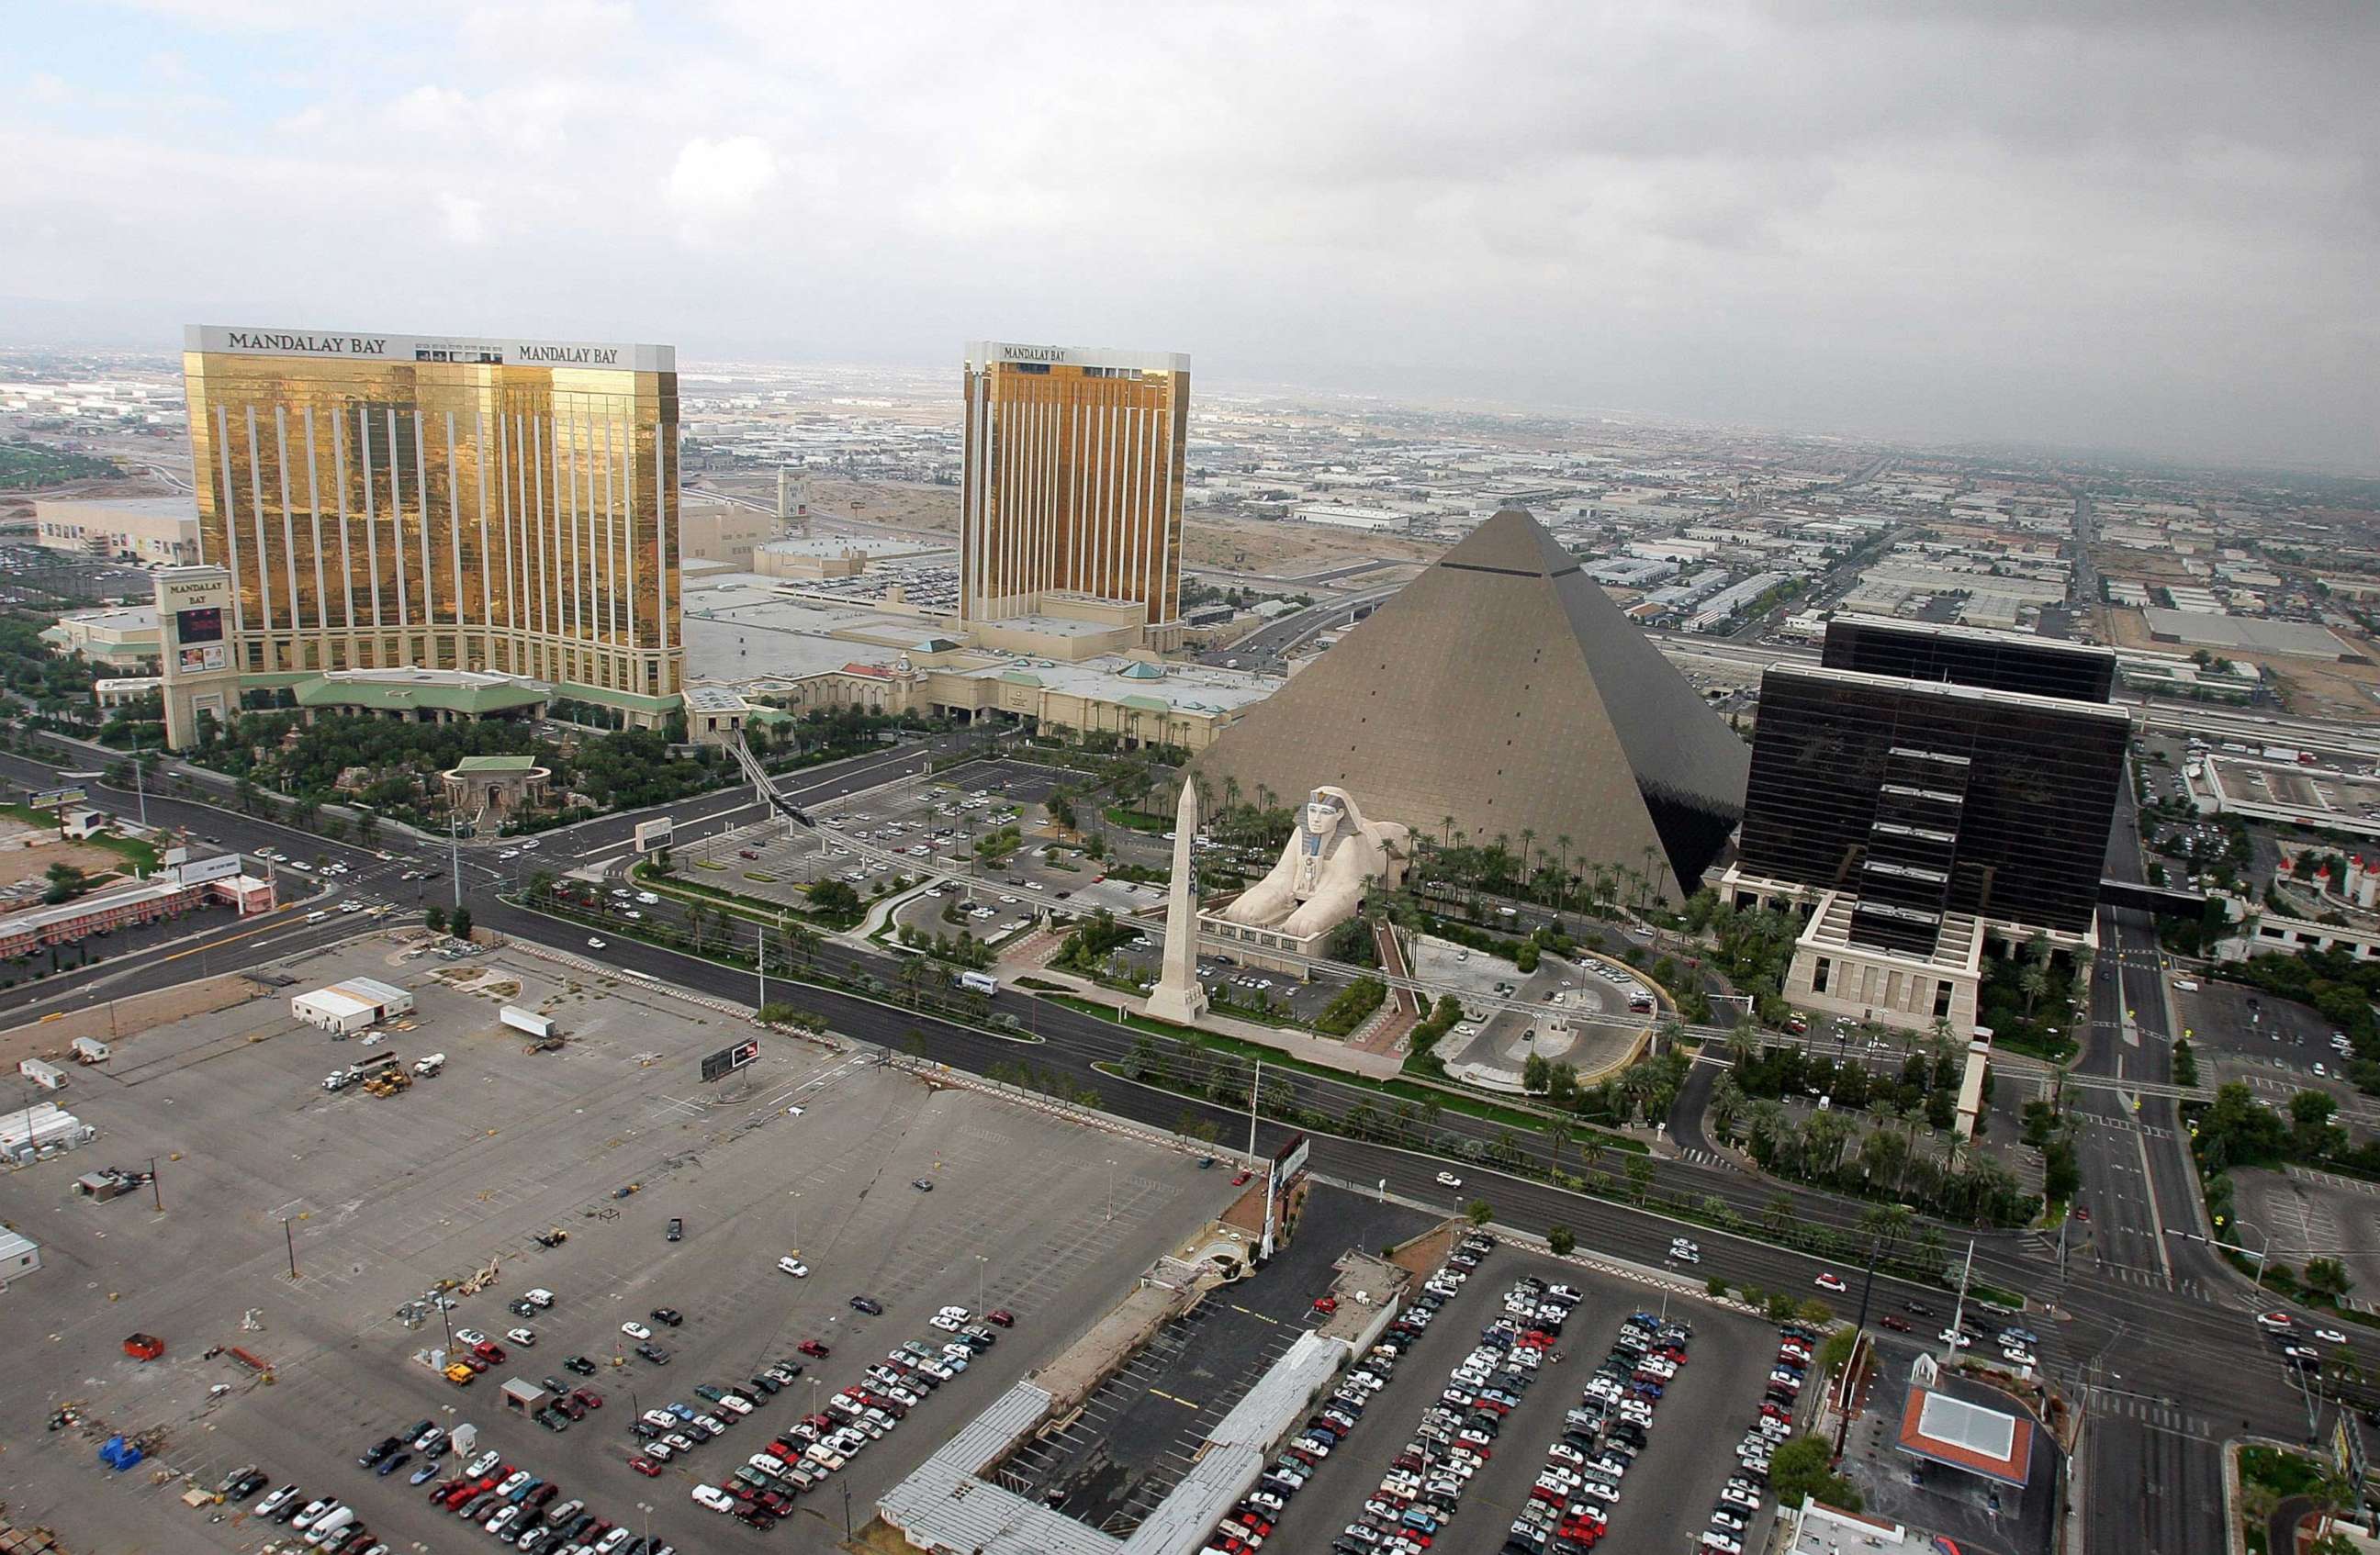 PHOTO: A 2005 file photo shows the Mandalay Bay Resort & Casino, left, the Luxor Hotel and Casino, right, and the lot where concertgoers were shot during a mass shooting on Oct. 1, 2017 in Las Vegas.